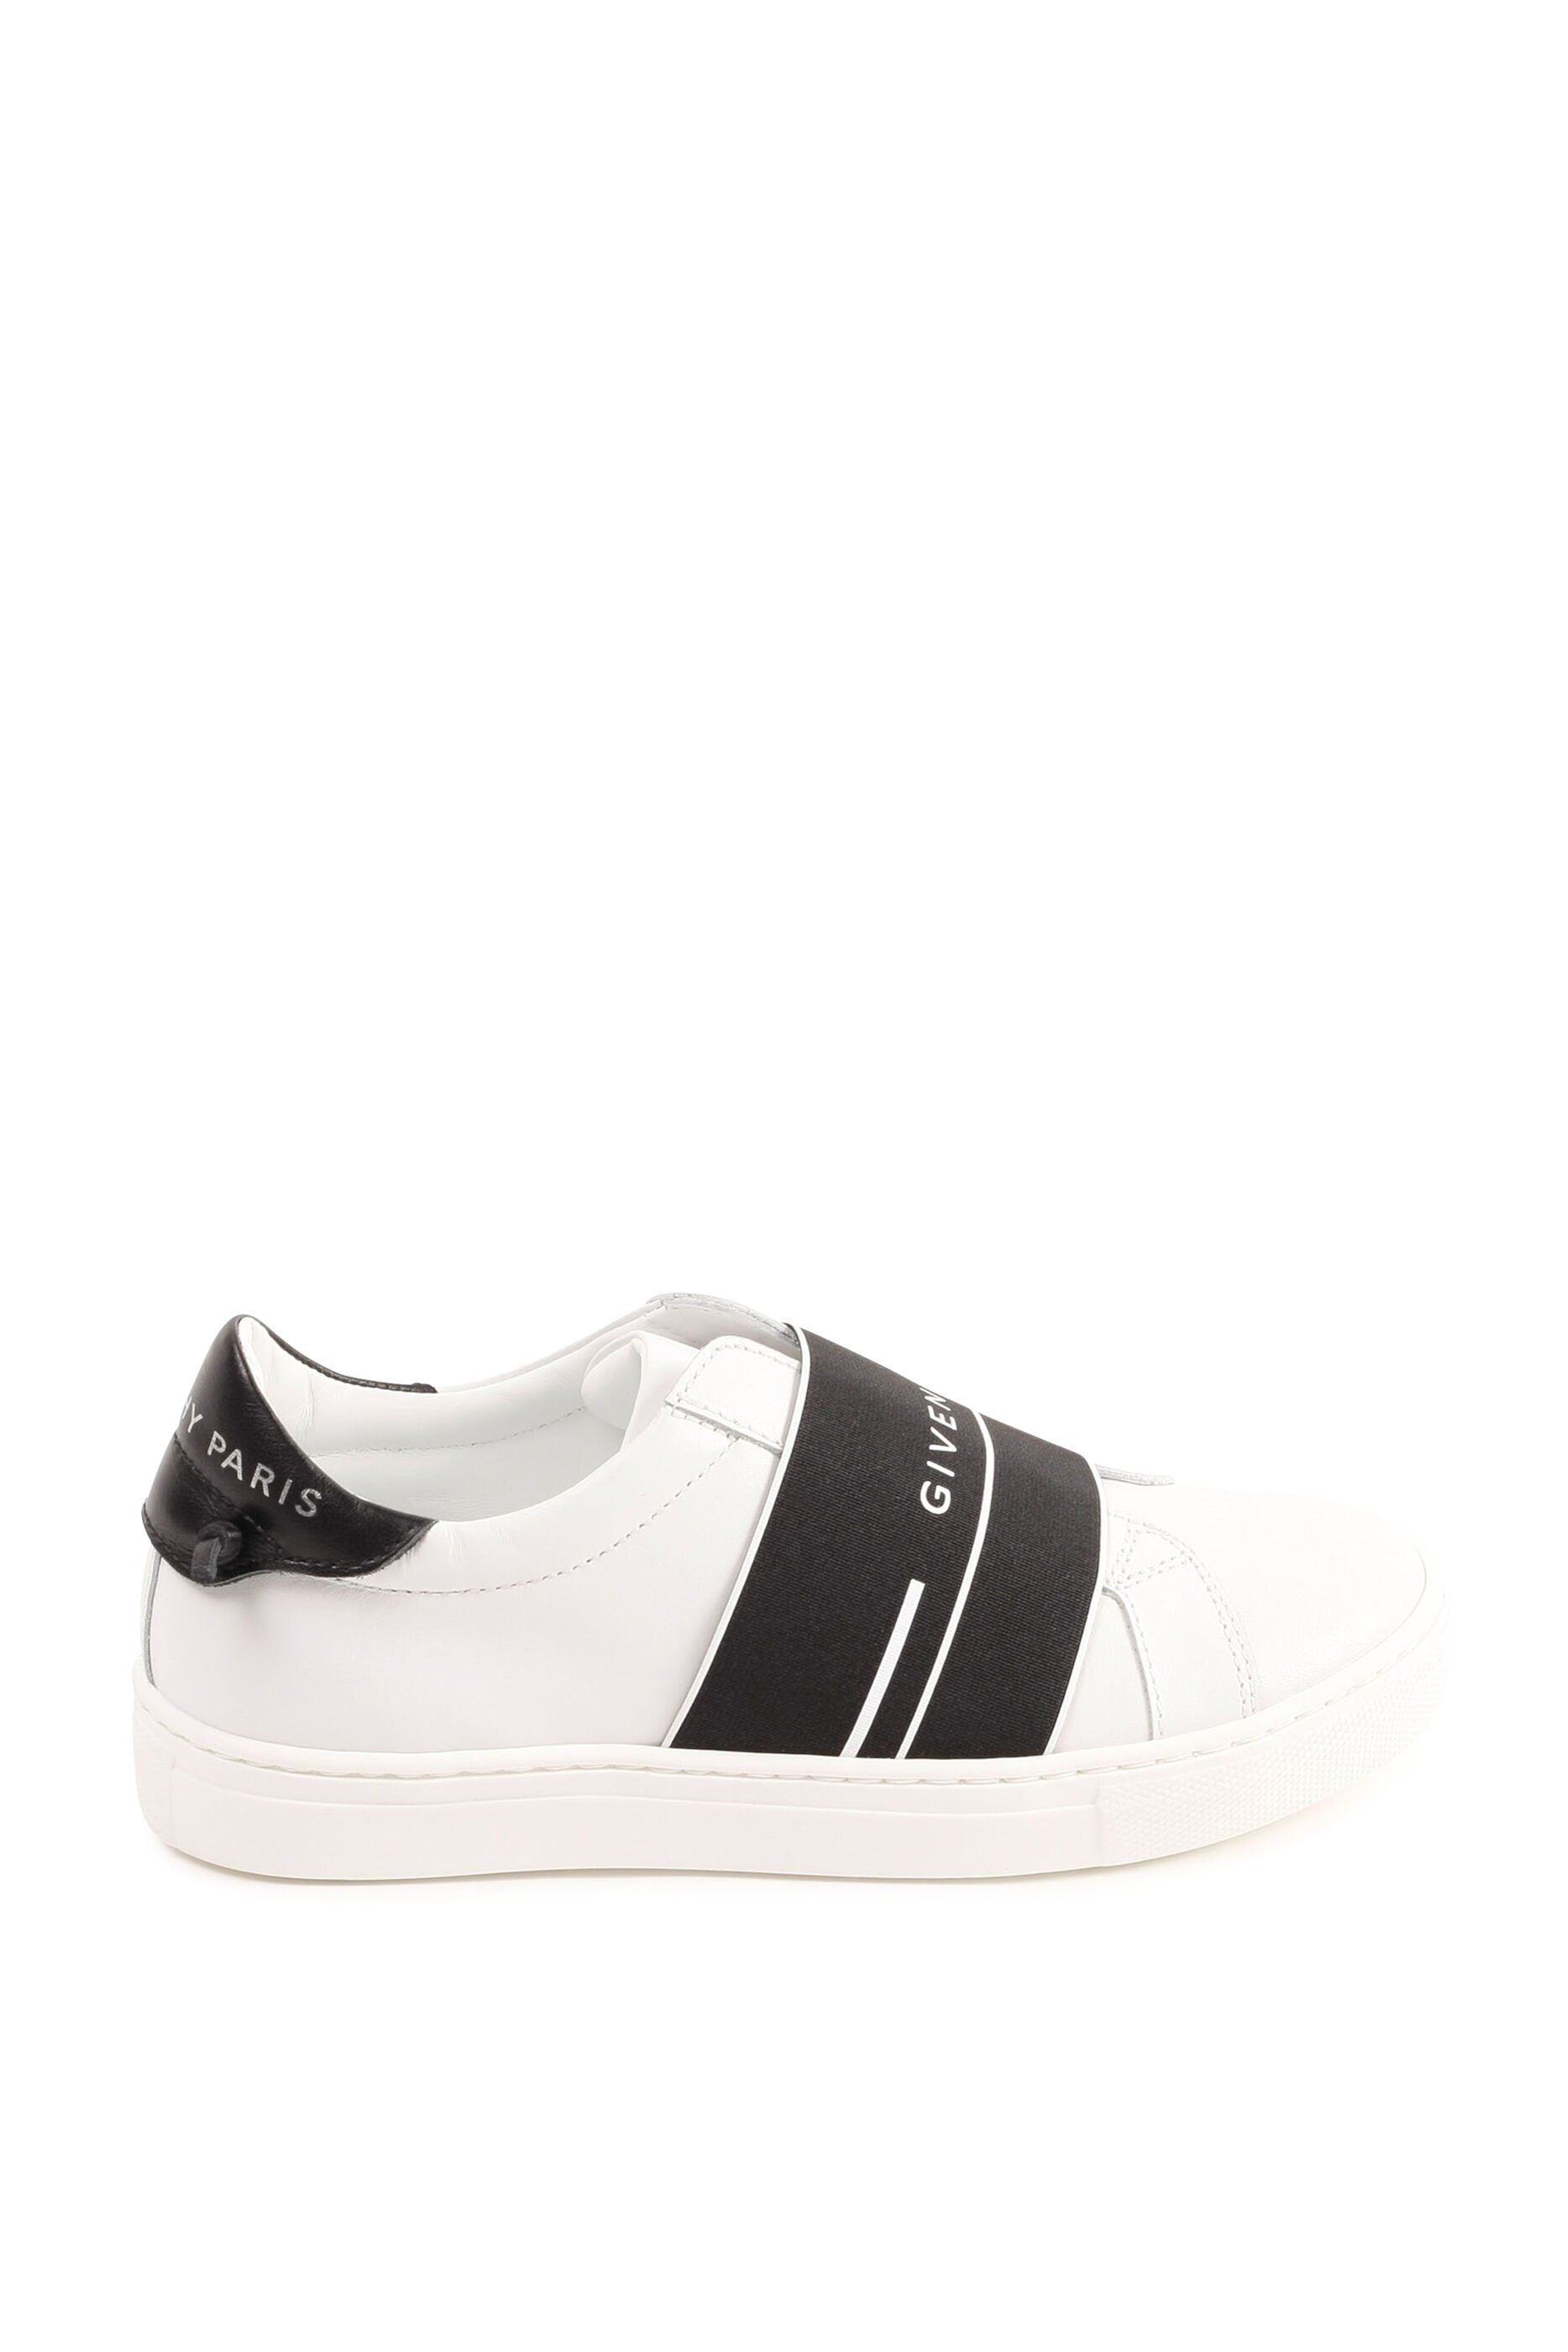 Buy Givenchy Logo Band Leather Sneakers 